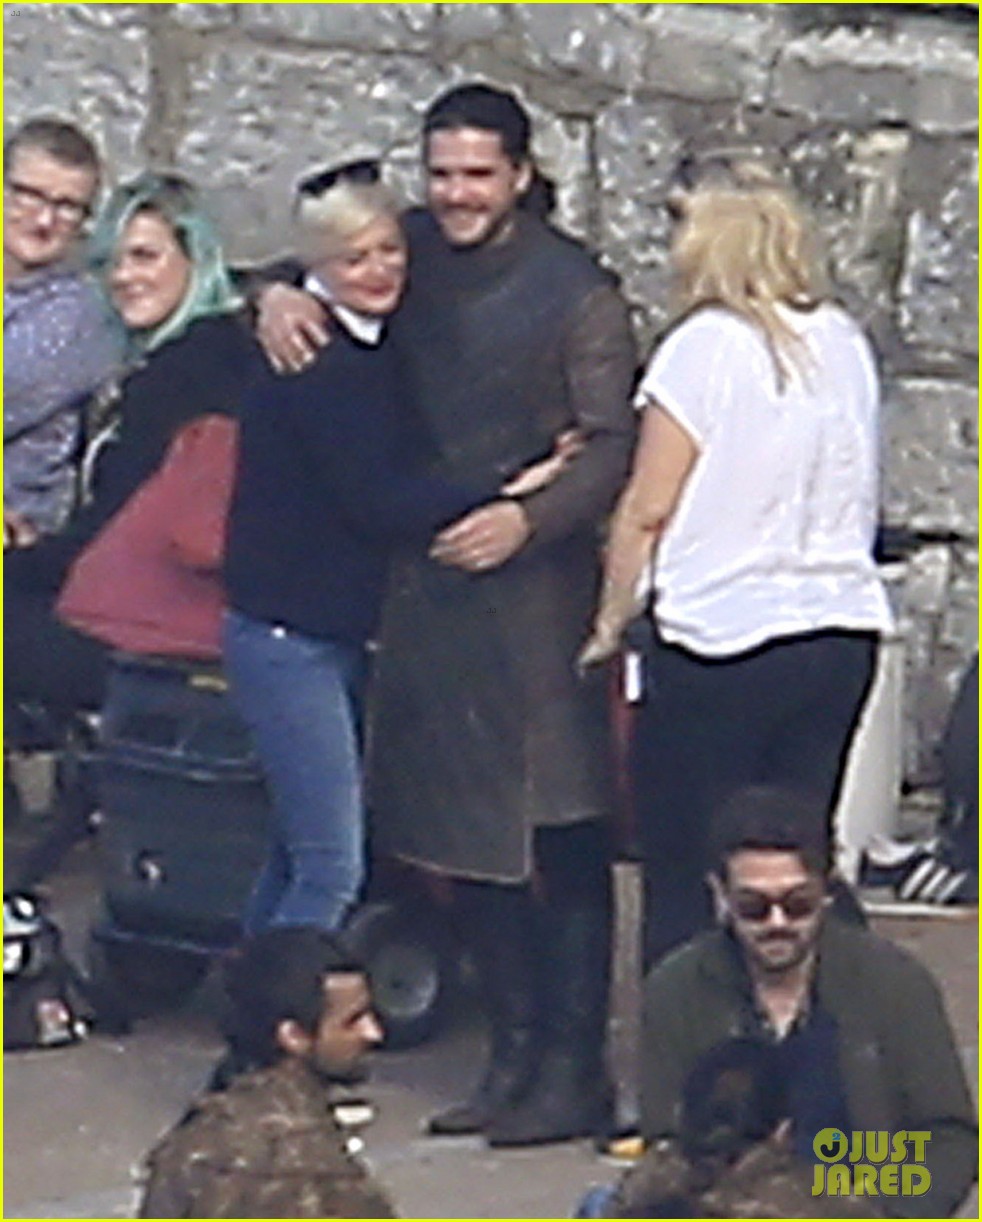 two-game-of-thrones-characters-meet-in-spoiler-filled-set-pics-04.jpg